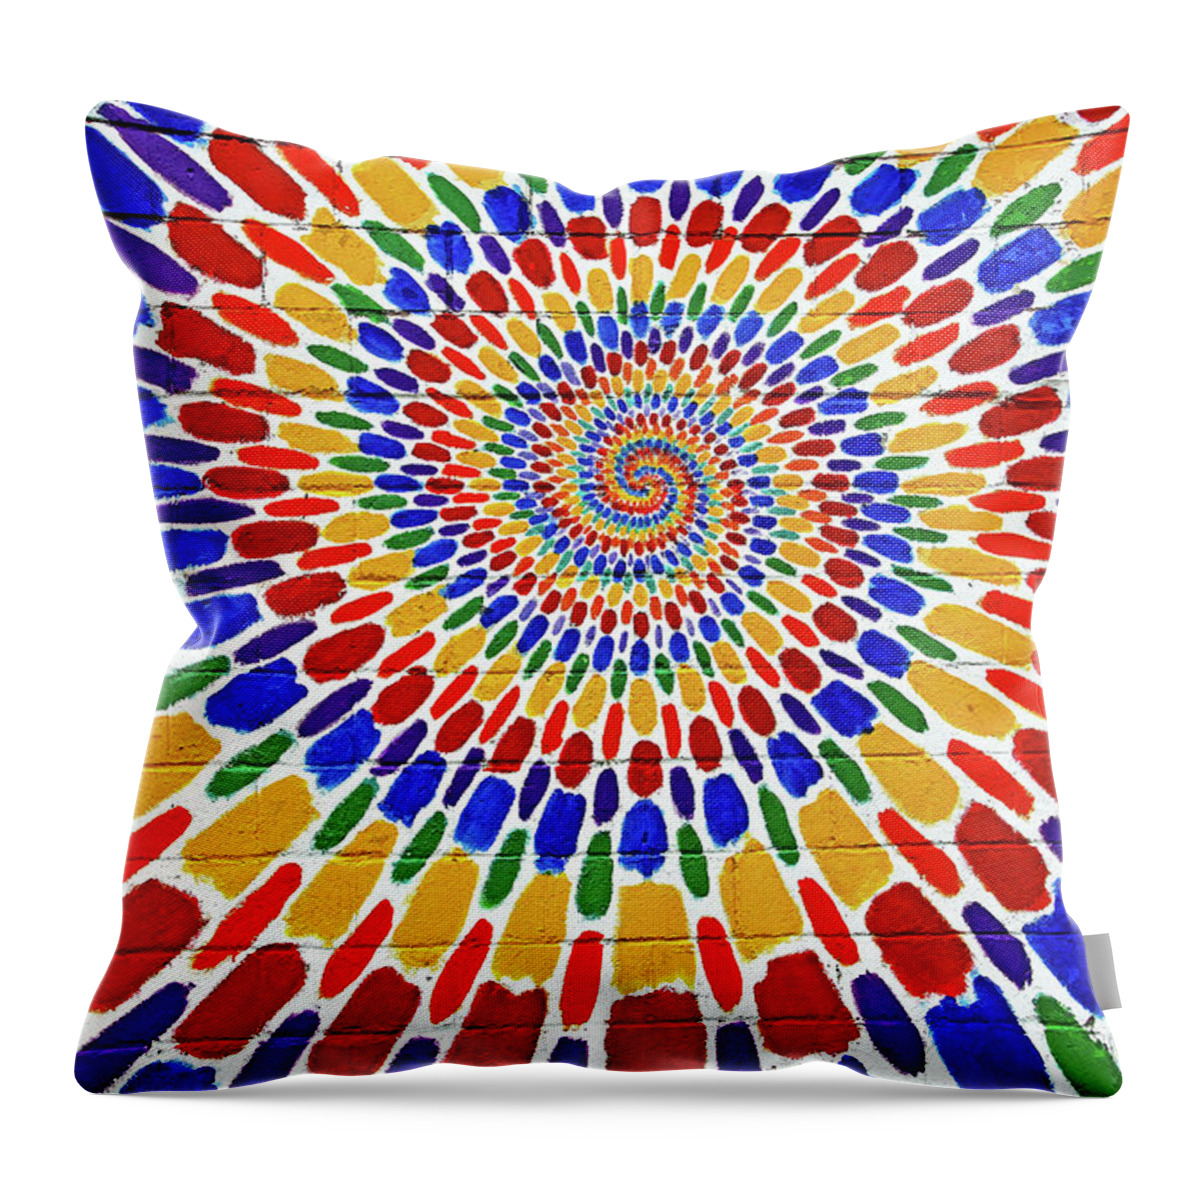 Psychedelic Throw Pillow featuring the photograph Psychedelic Swirl by Debbie Oppermann